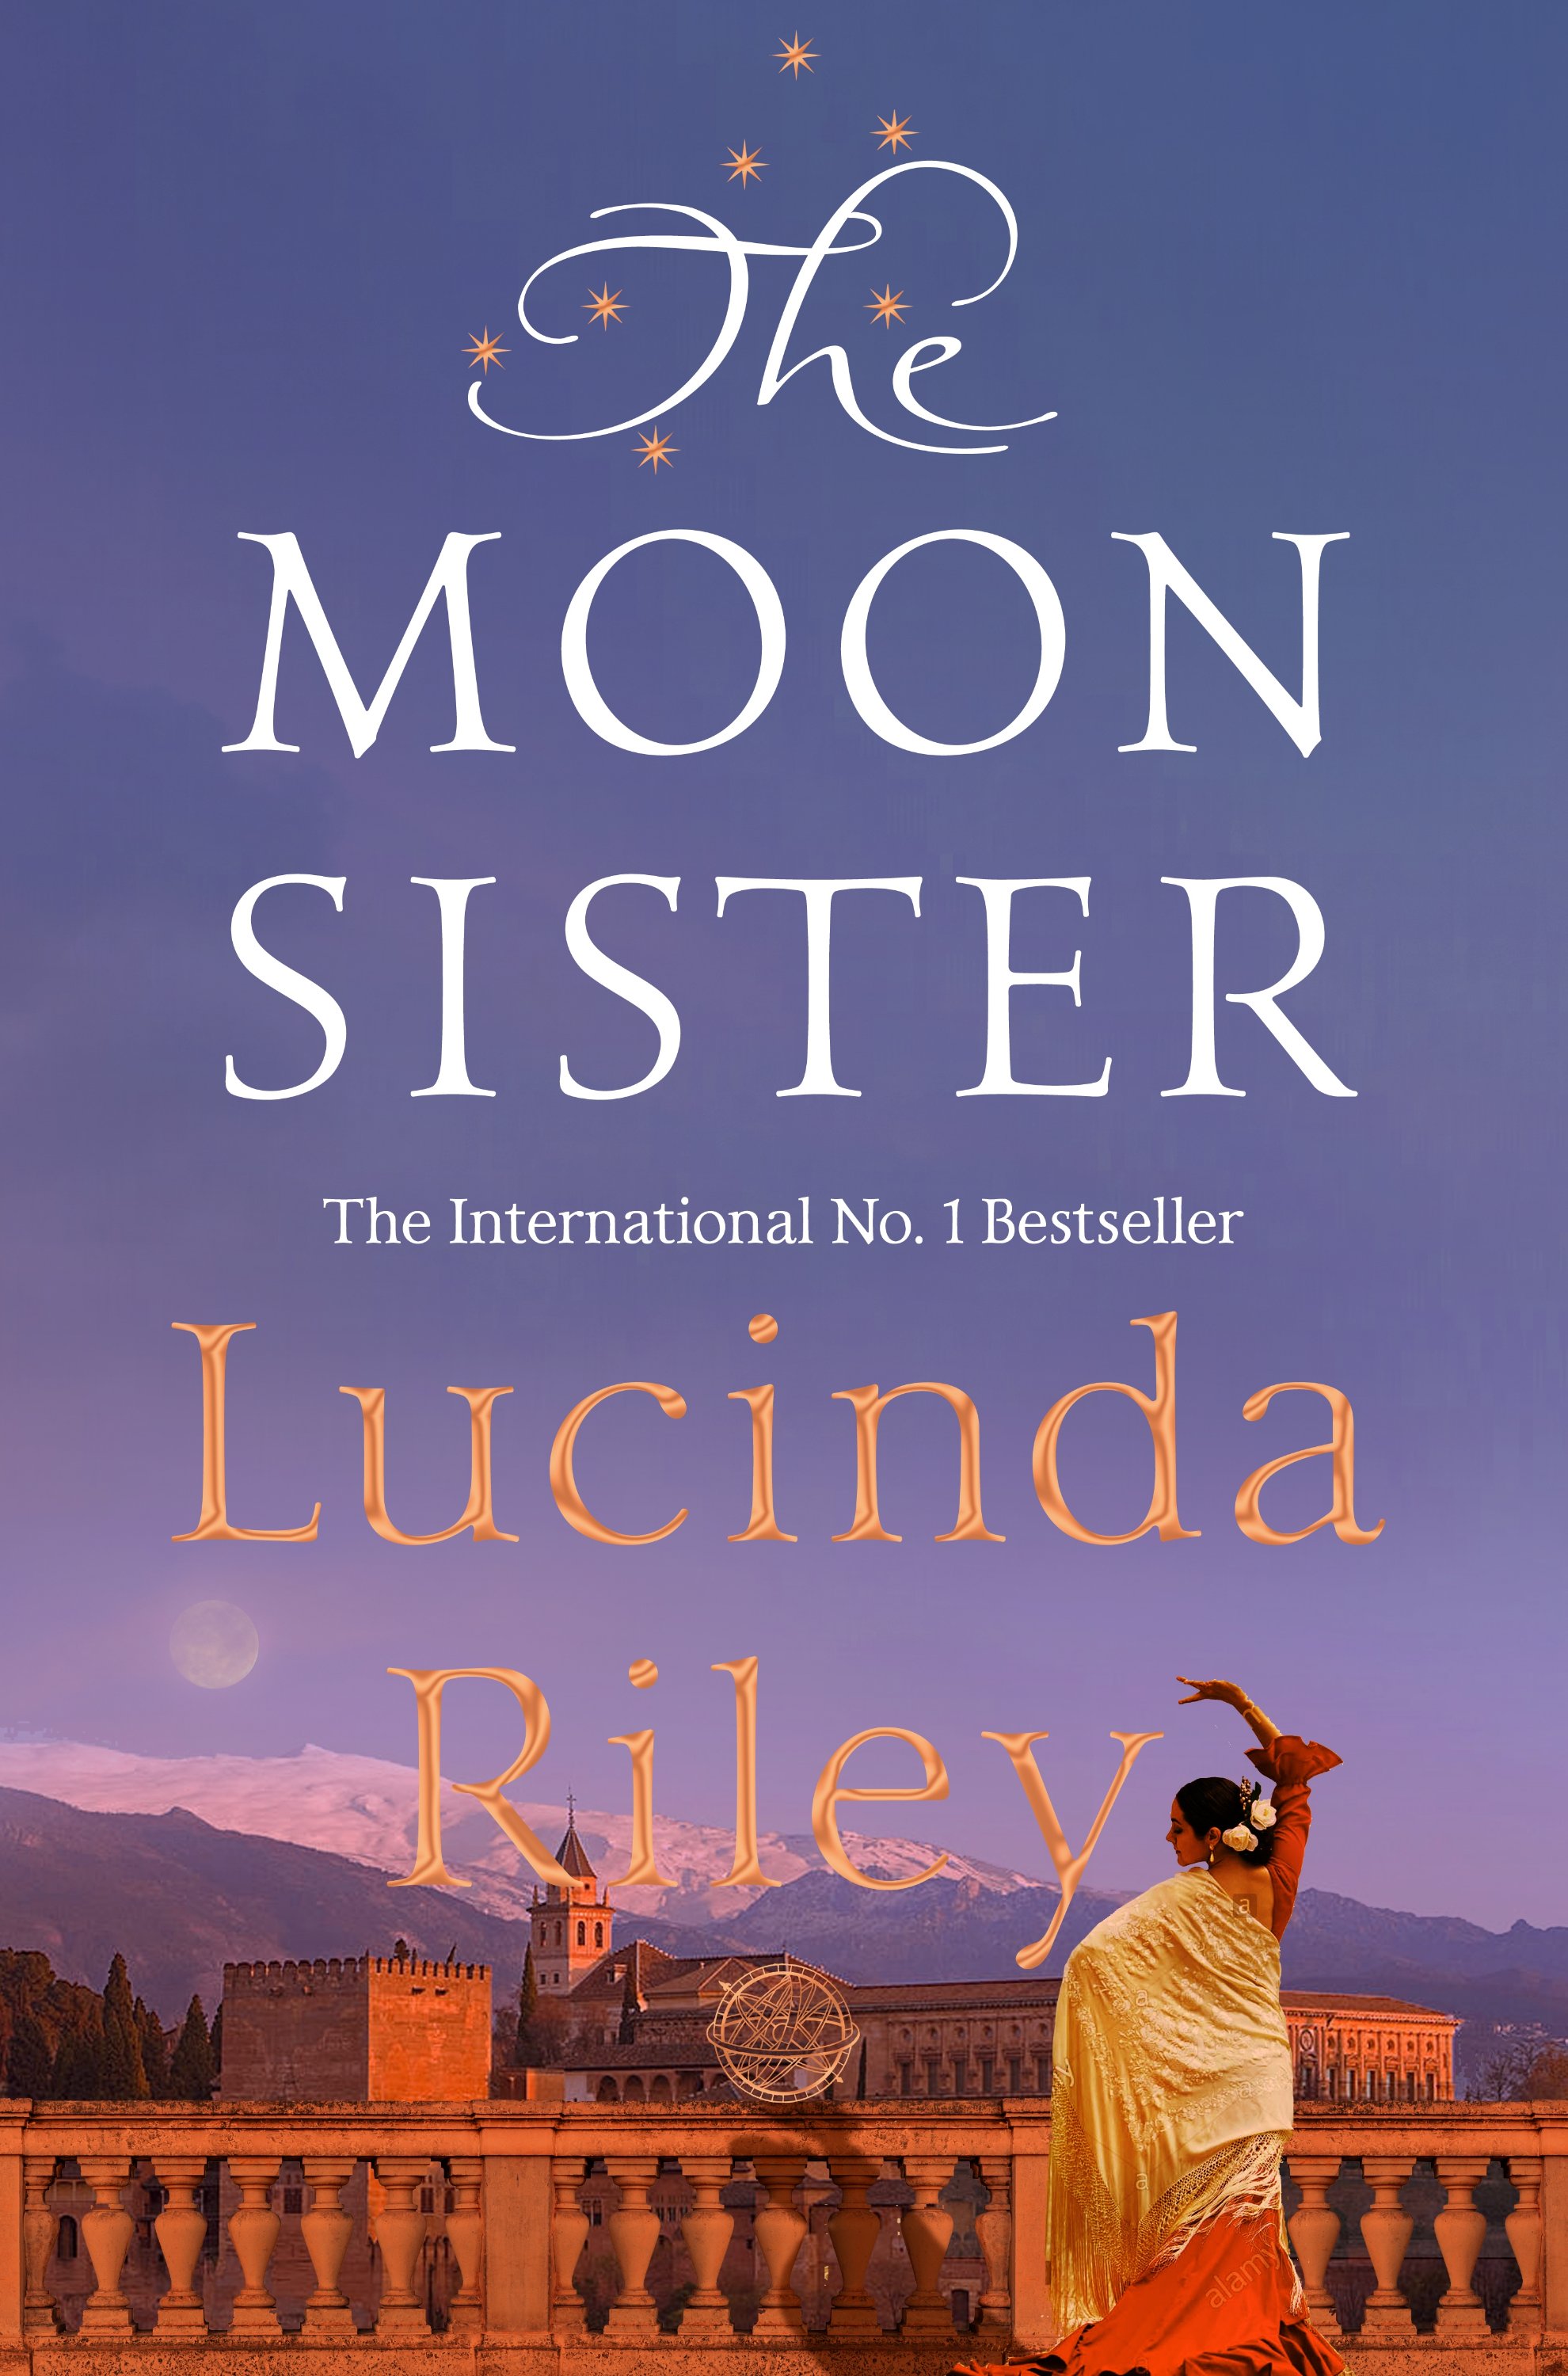 Sister moon. The Moon sister. Вино «sister Moon». "The Seven sisters" by Lucinda Riley. Seventh sister.